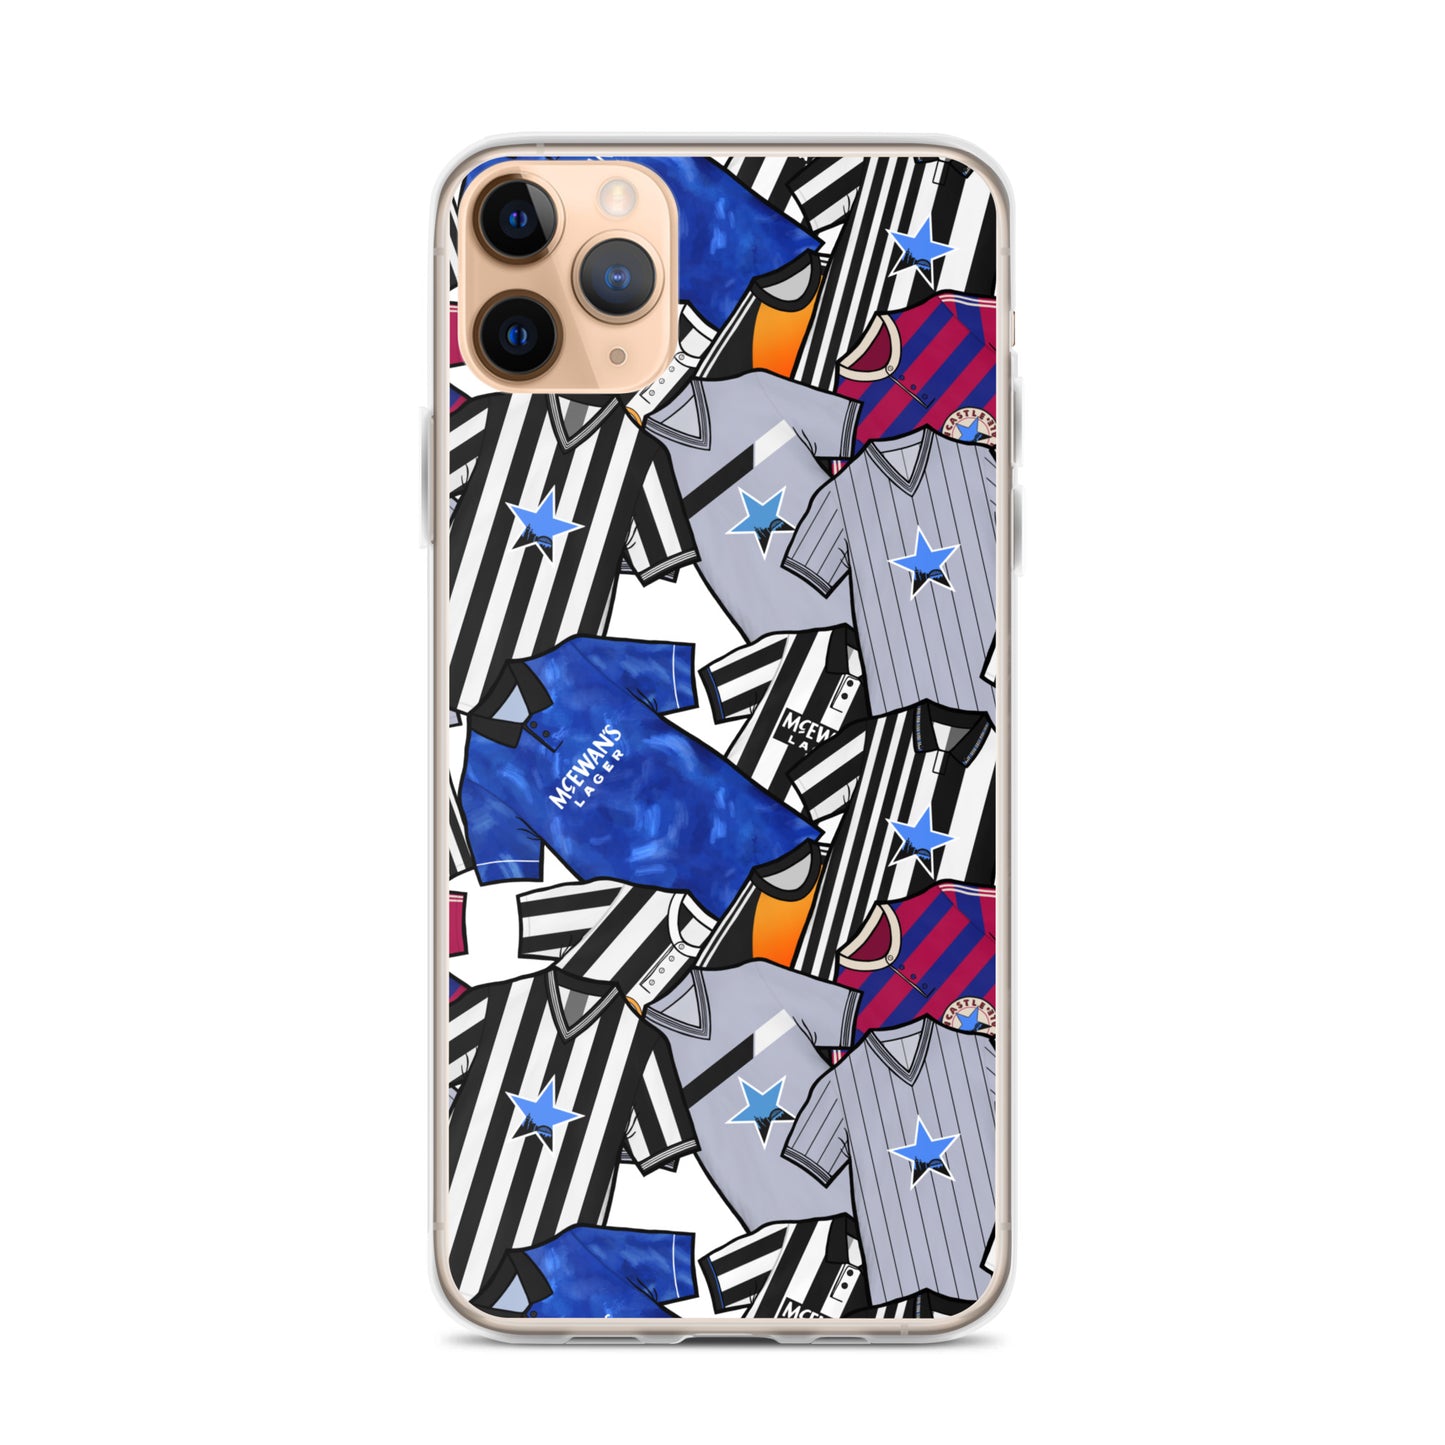 Phone case for iPhone 11 Pro Max inspired by the Retro shirts of Newcastle United!